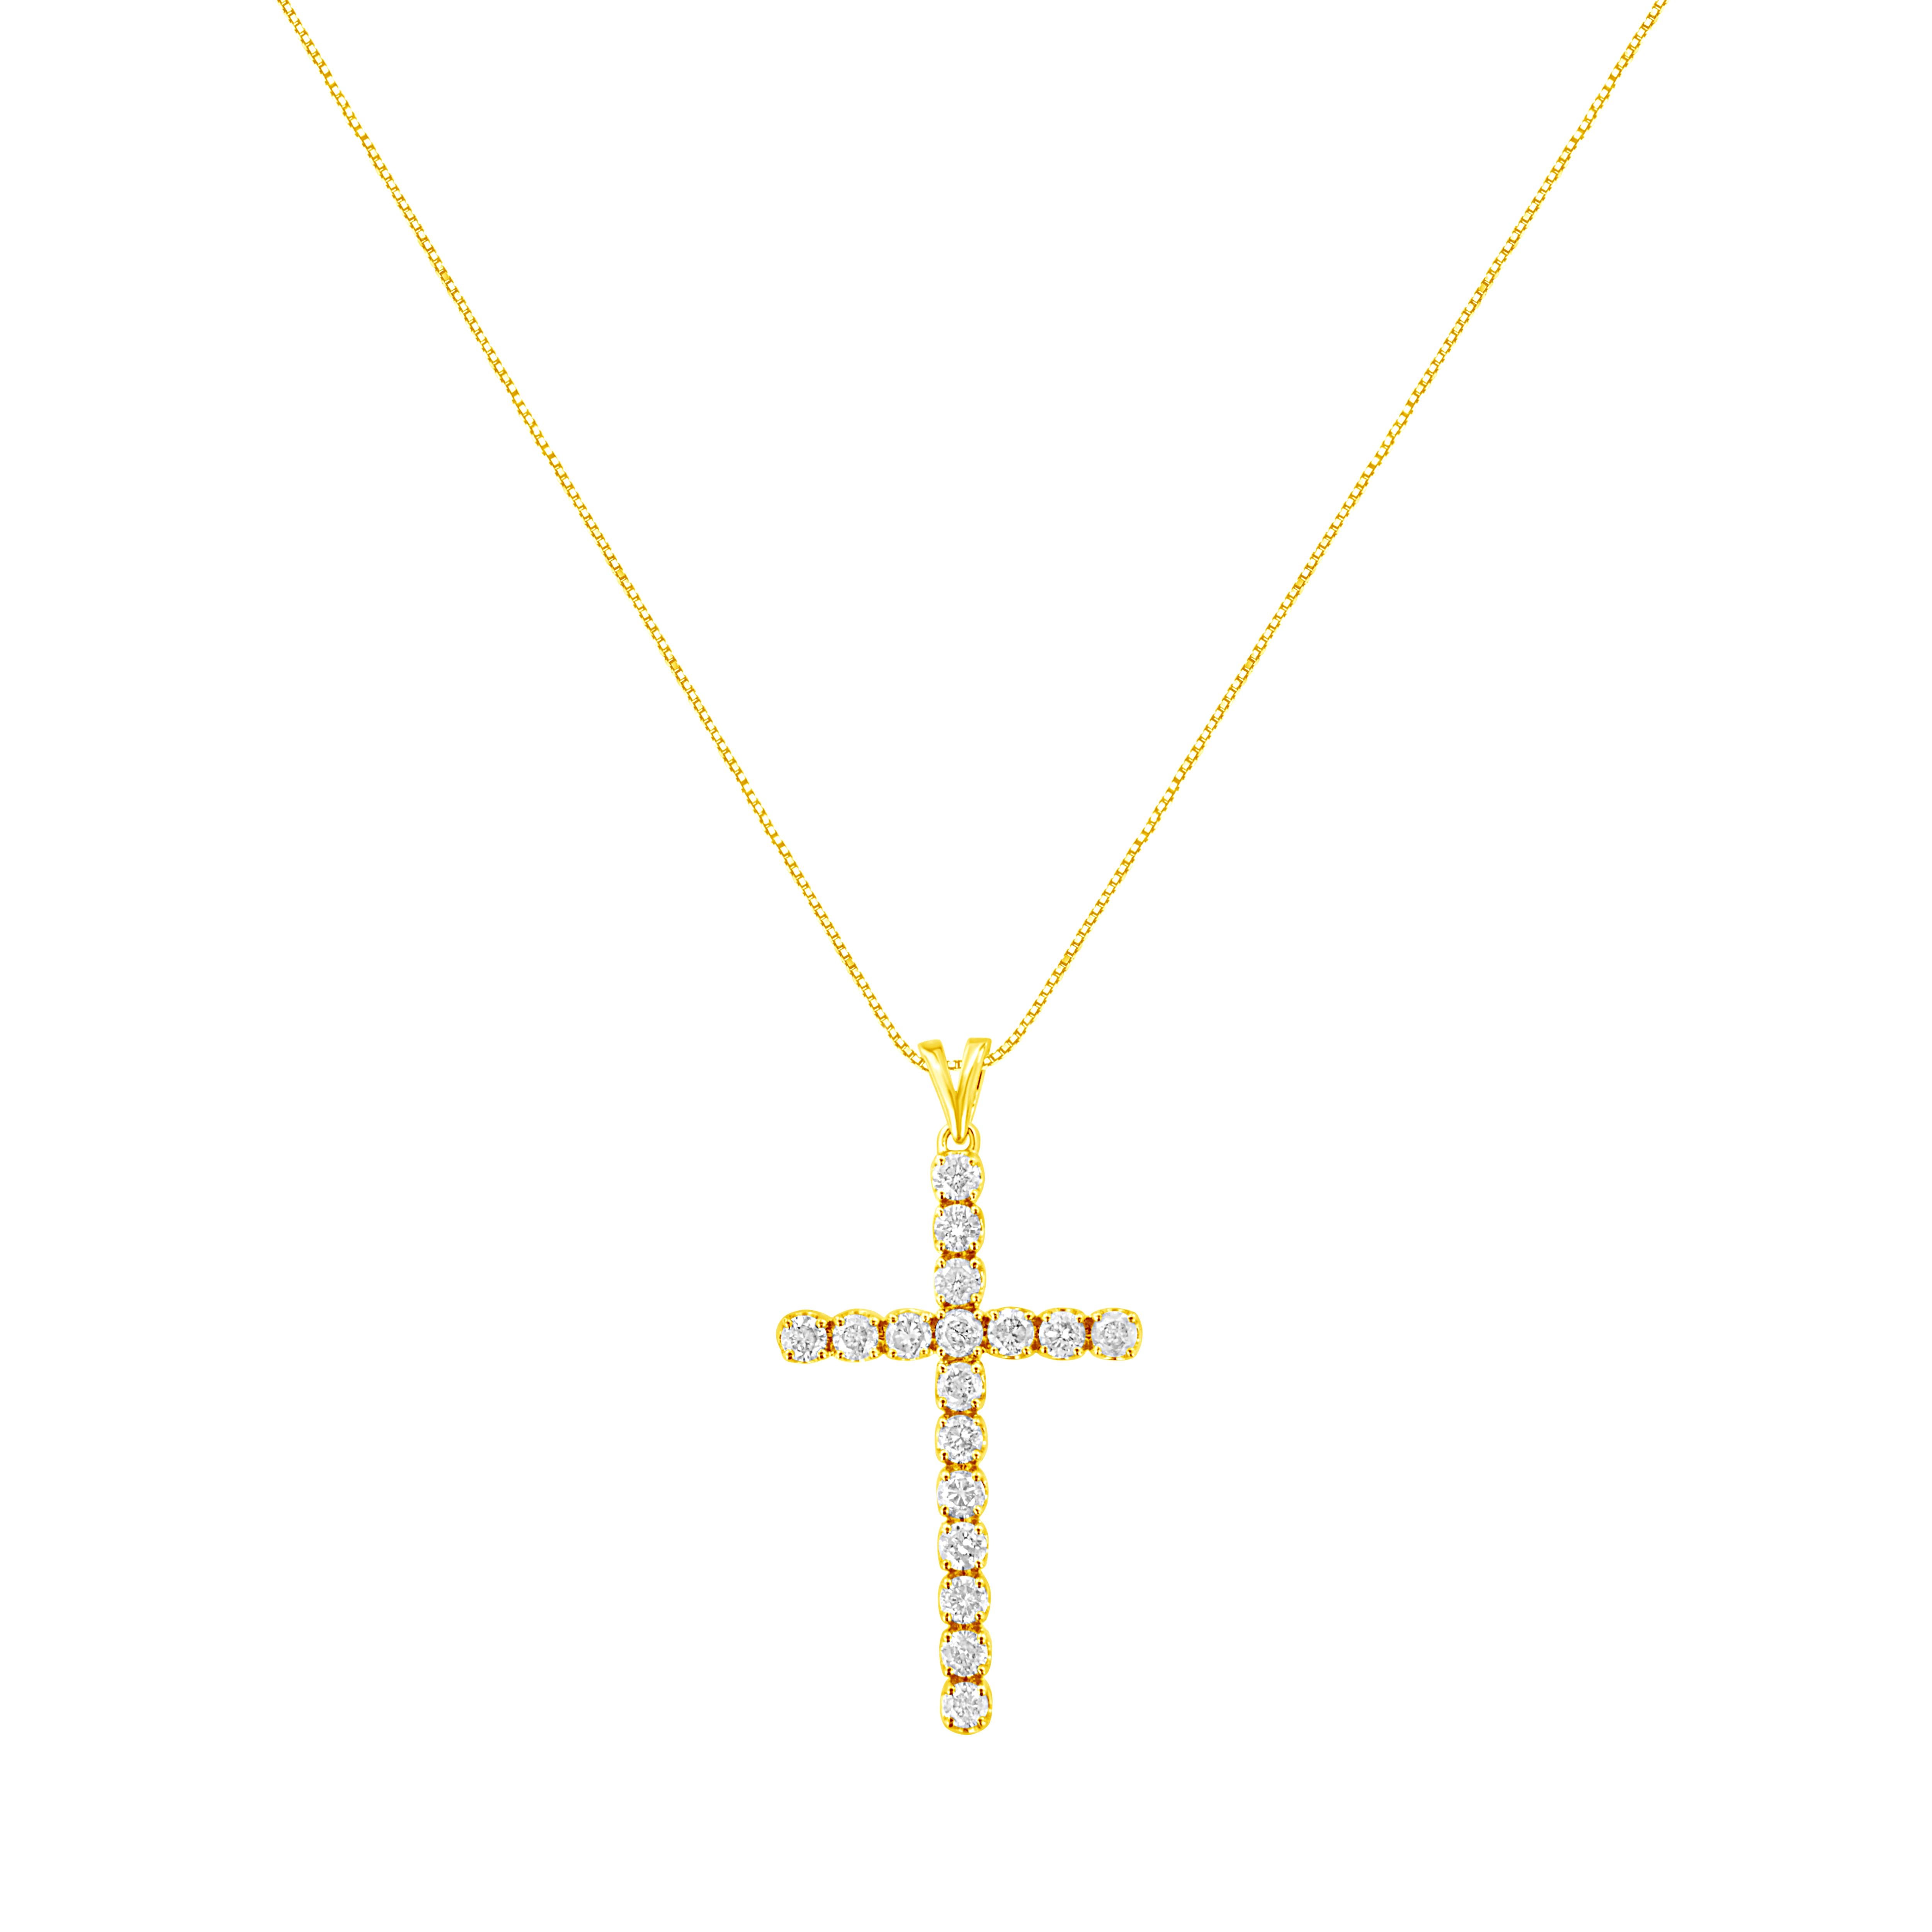 Let your faith shine through with this stunning 10k yellow gold plated .925 sterling silver cross pendant. An elegant display of belief, this beautiful piece is composed of 2 cttw of round-cut diamonds in a prong setting. Comes with an 18